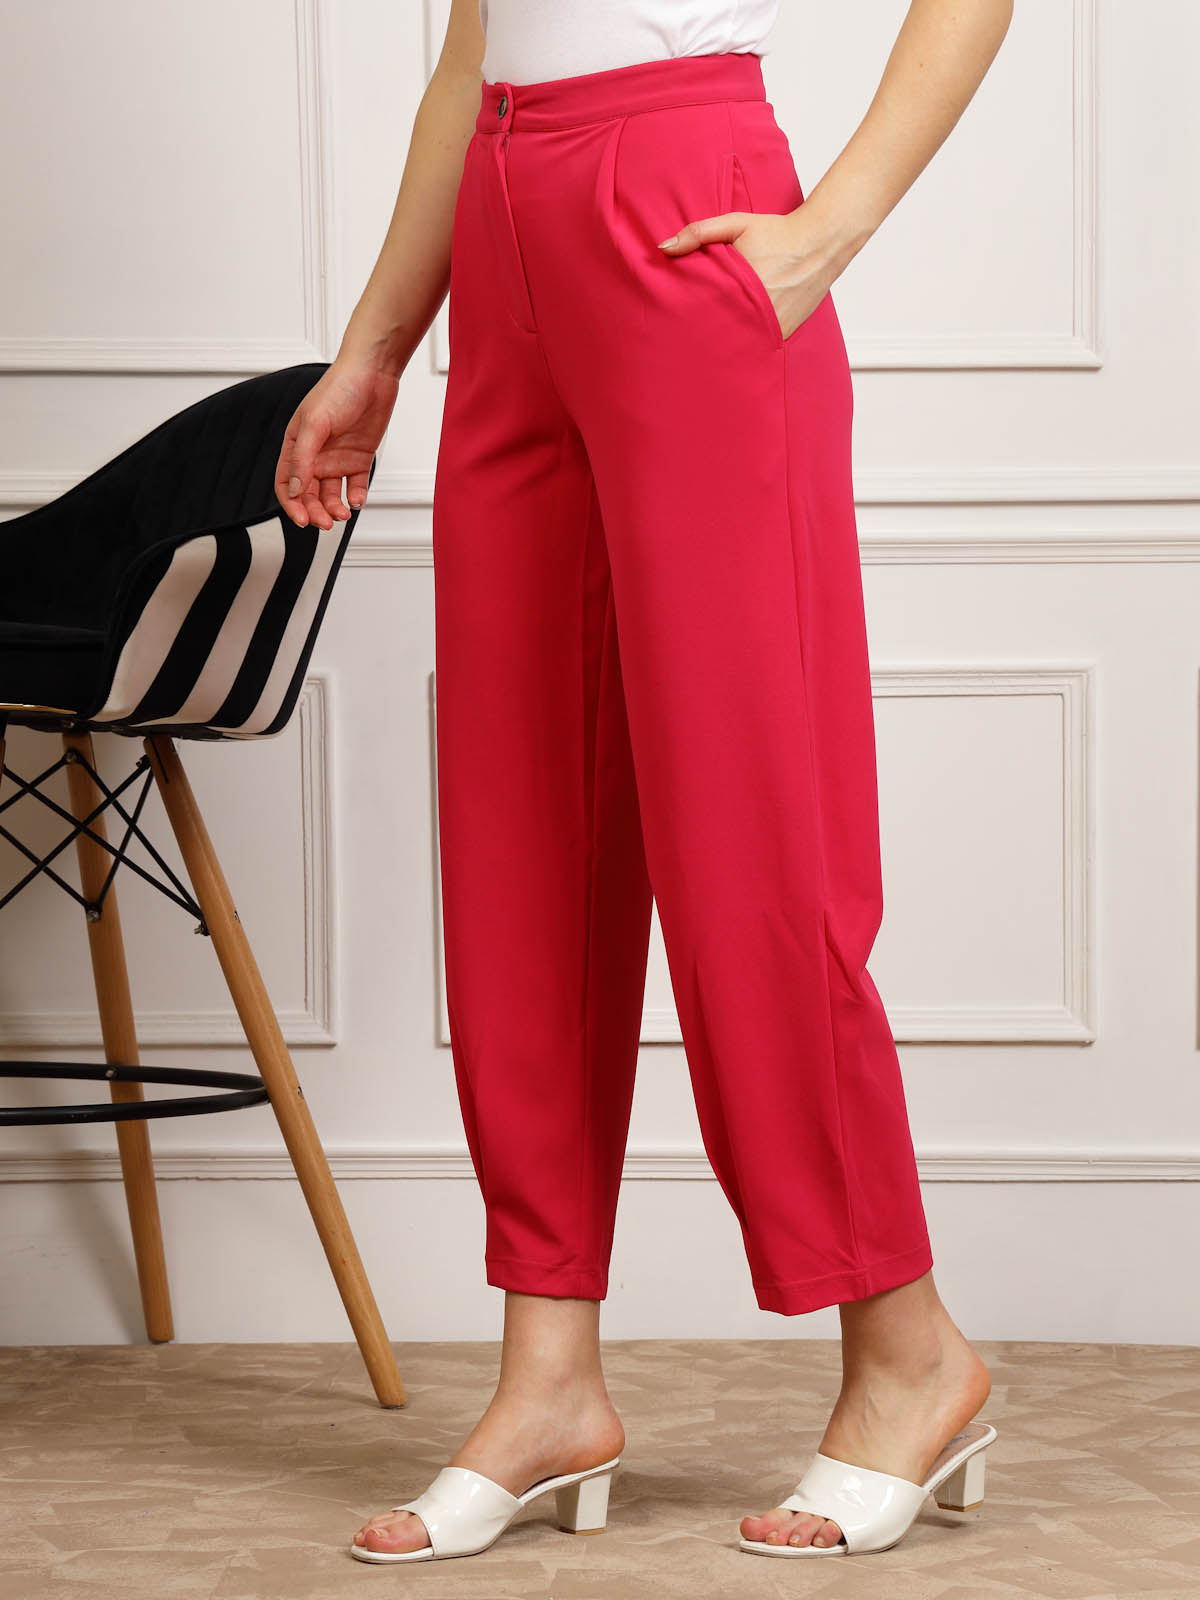 PATRORNA Women Smart Pleated Cotton Peg Trousers Price in India, Full  Specifications & Offers | DTashion.com